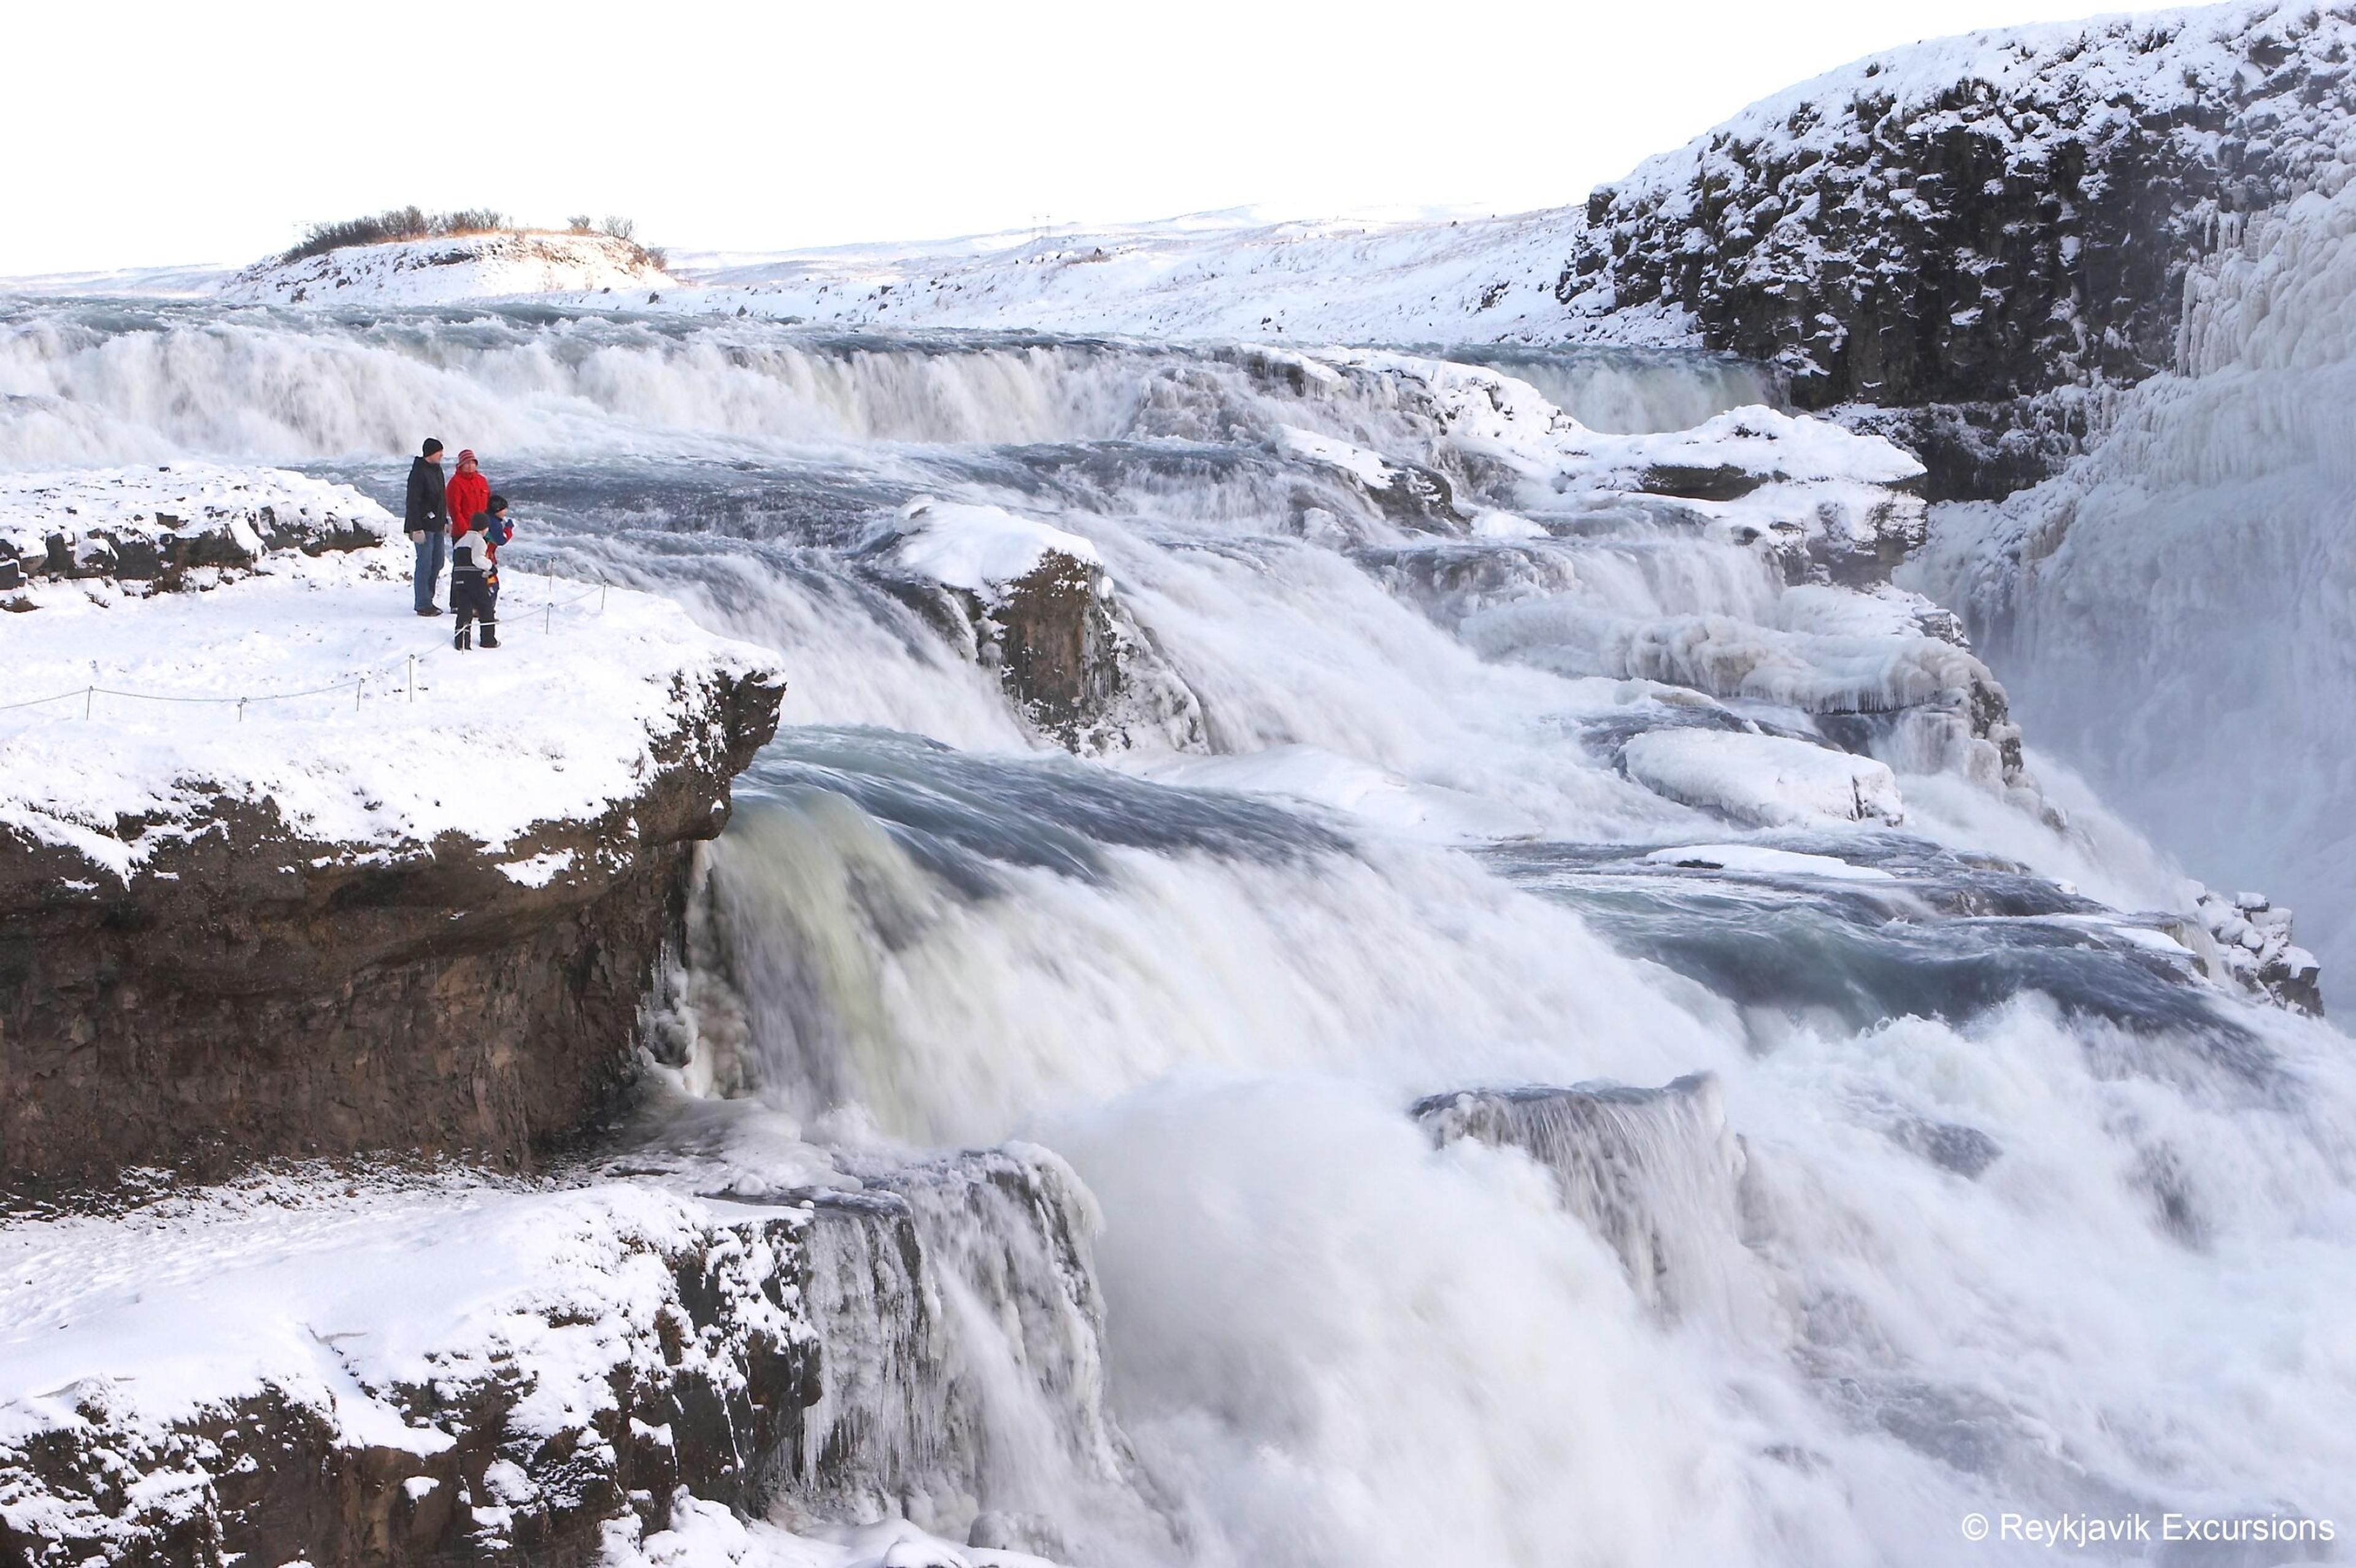 People admiring the Gullfoss Waterfall sorrounded by icy landscapes.